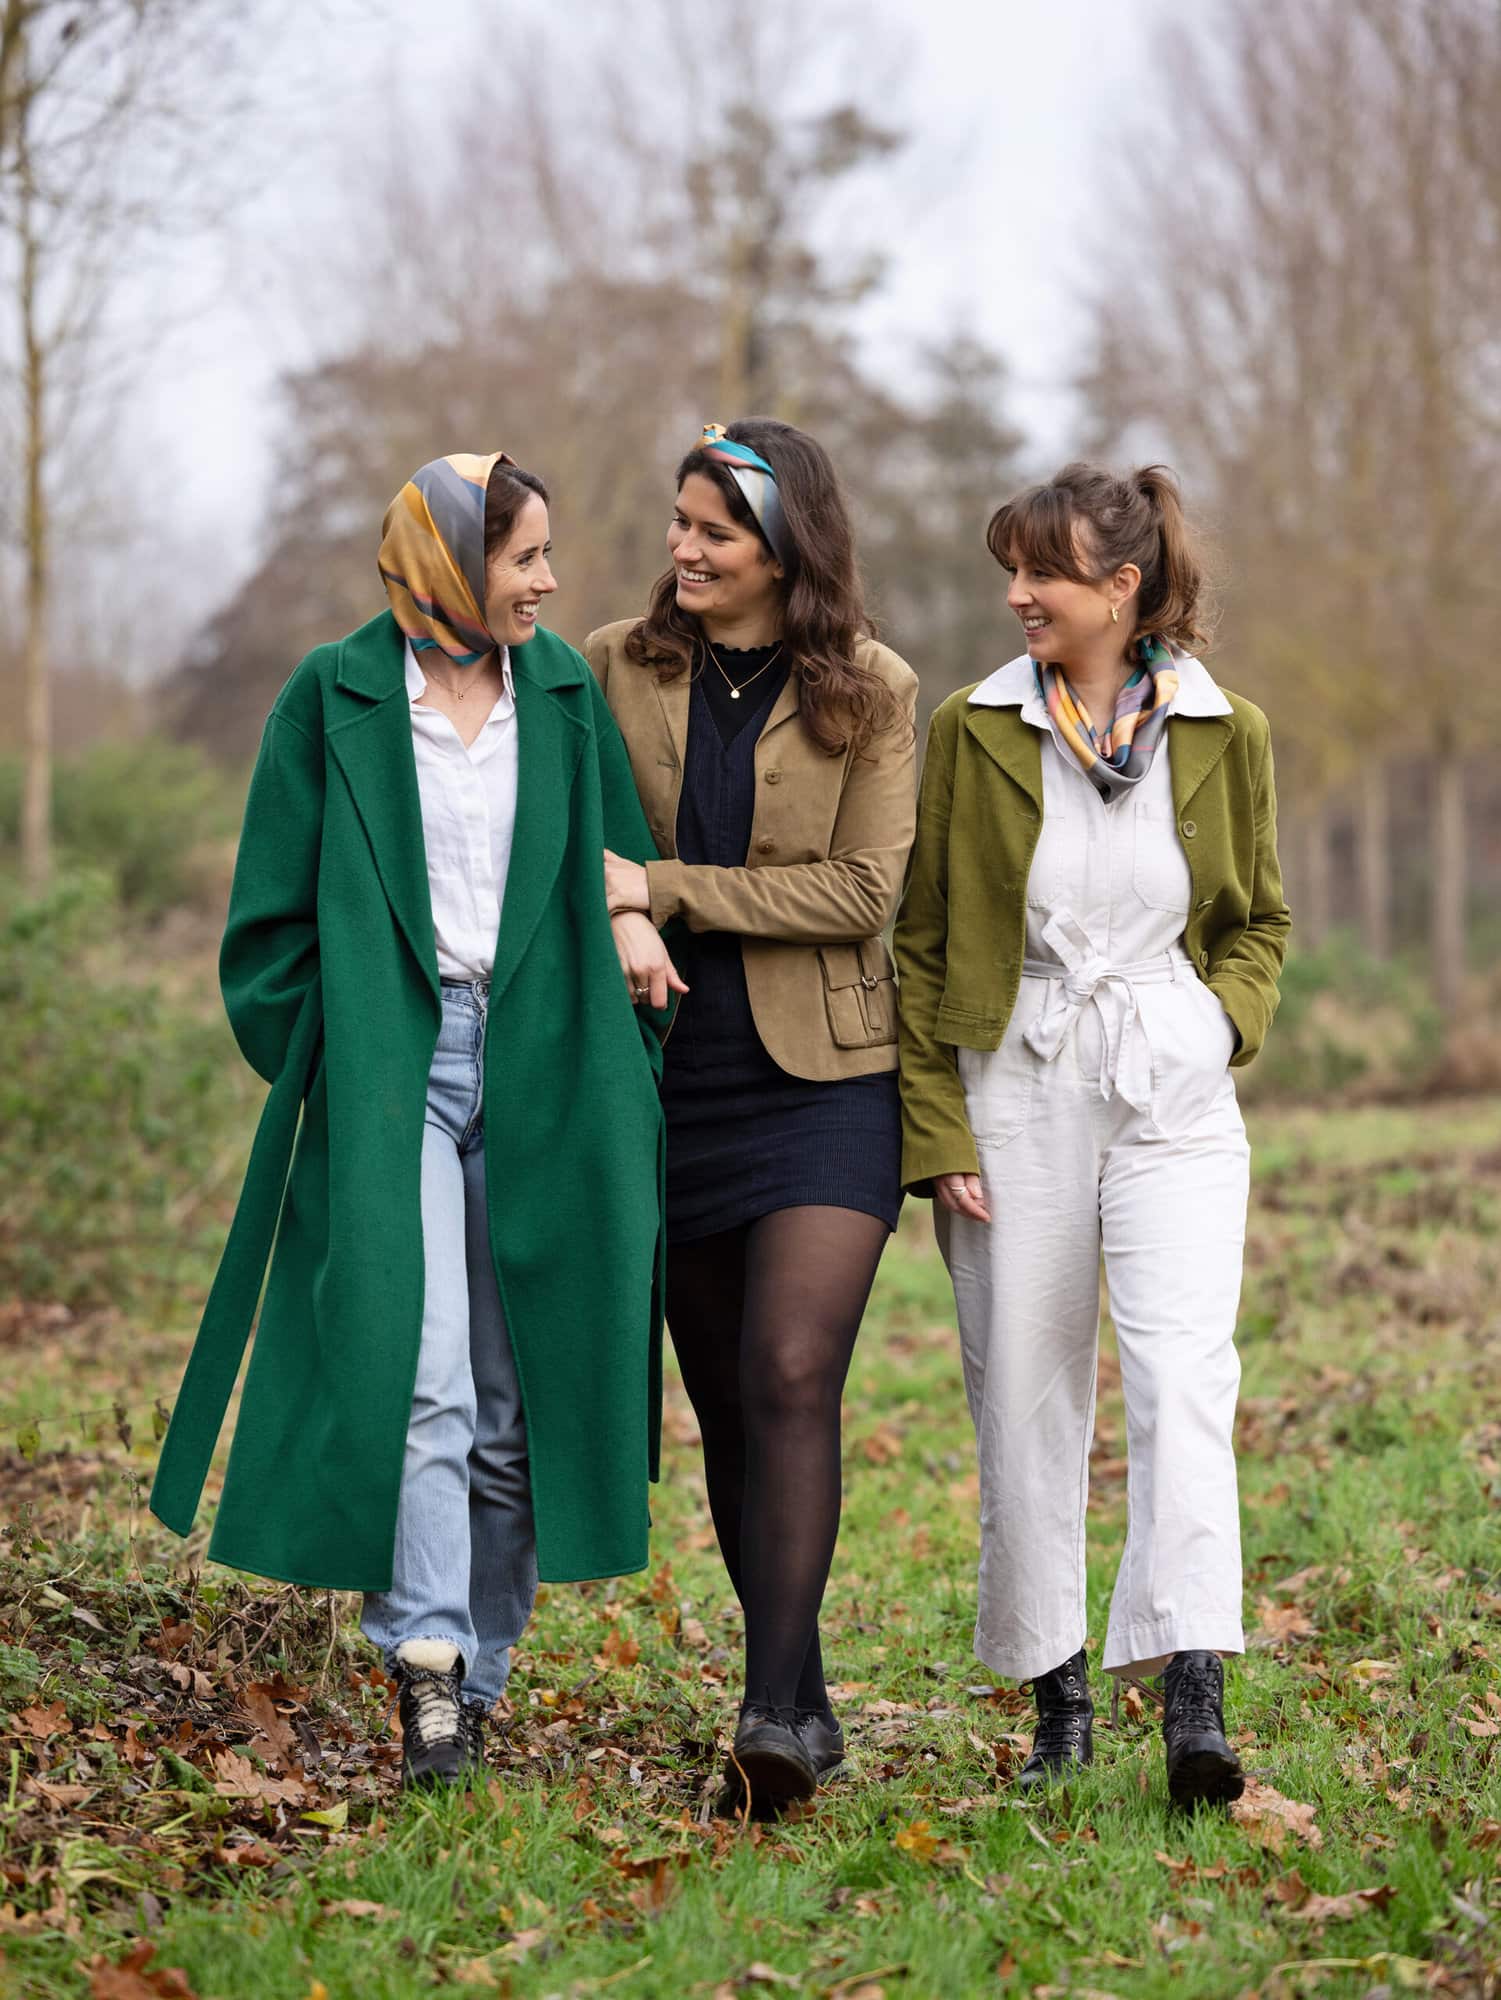 Three women walk arm in arm in the countryside wearing Mai Norman Headscarves. Photographed by Alison McKenny Photography